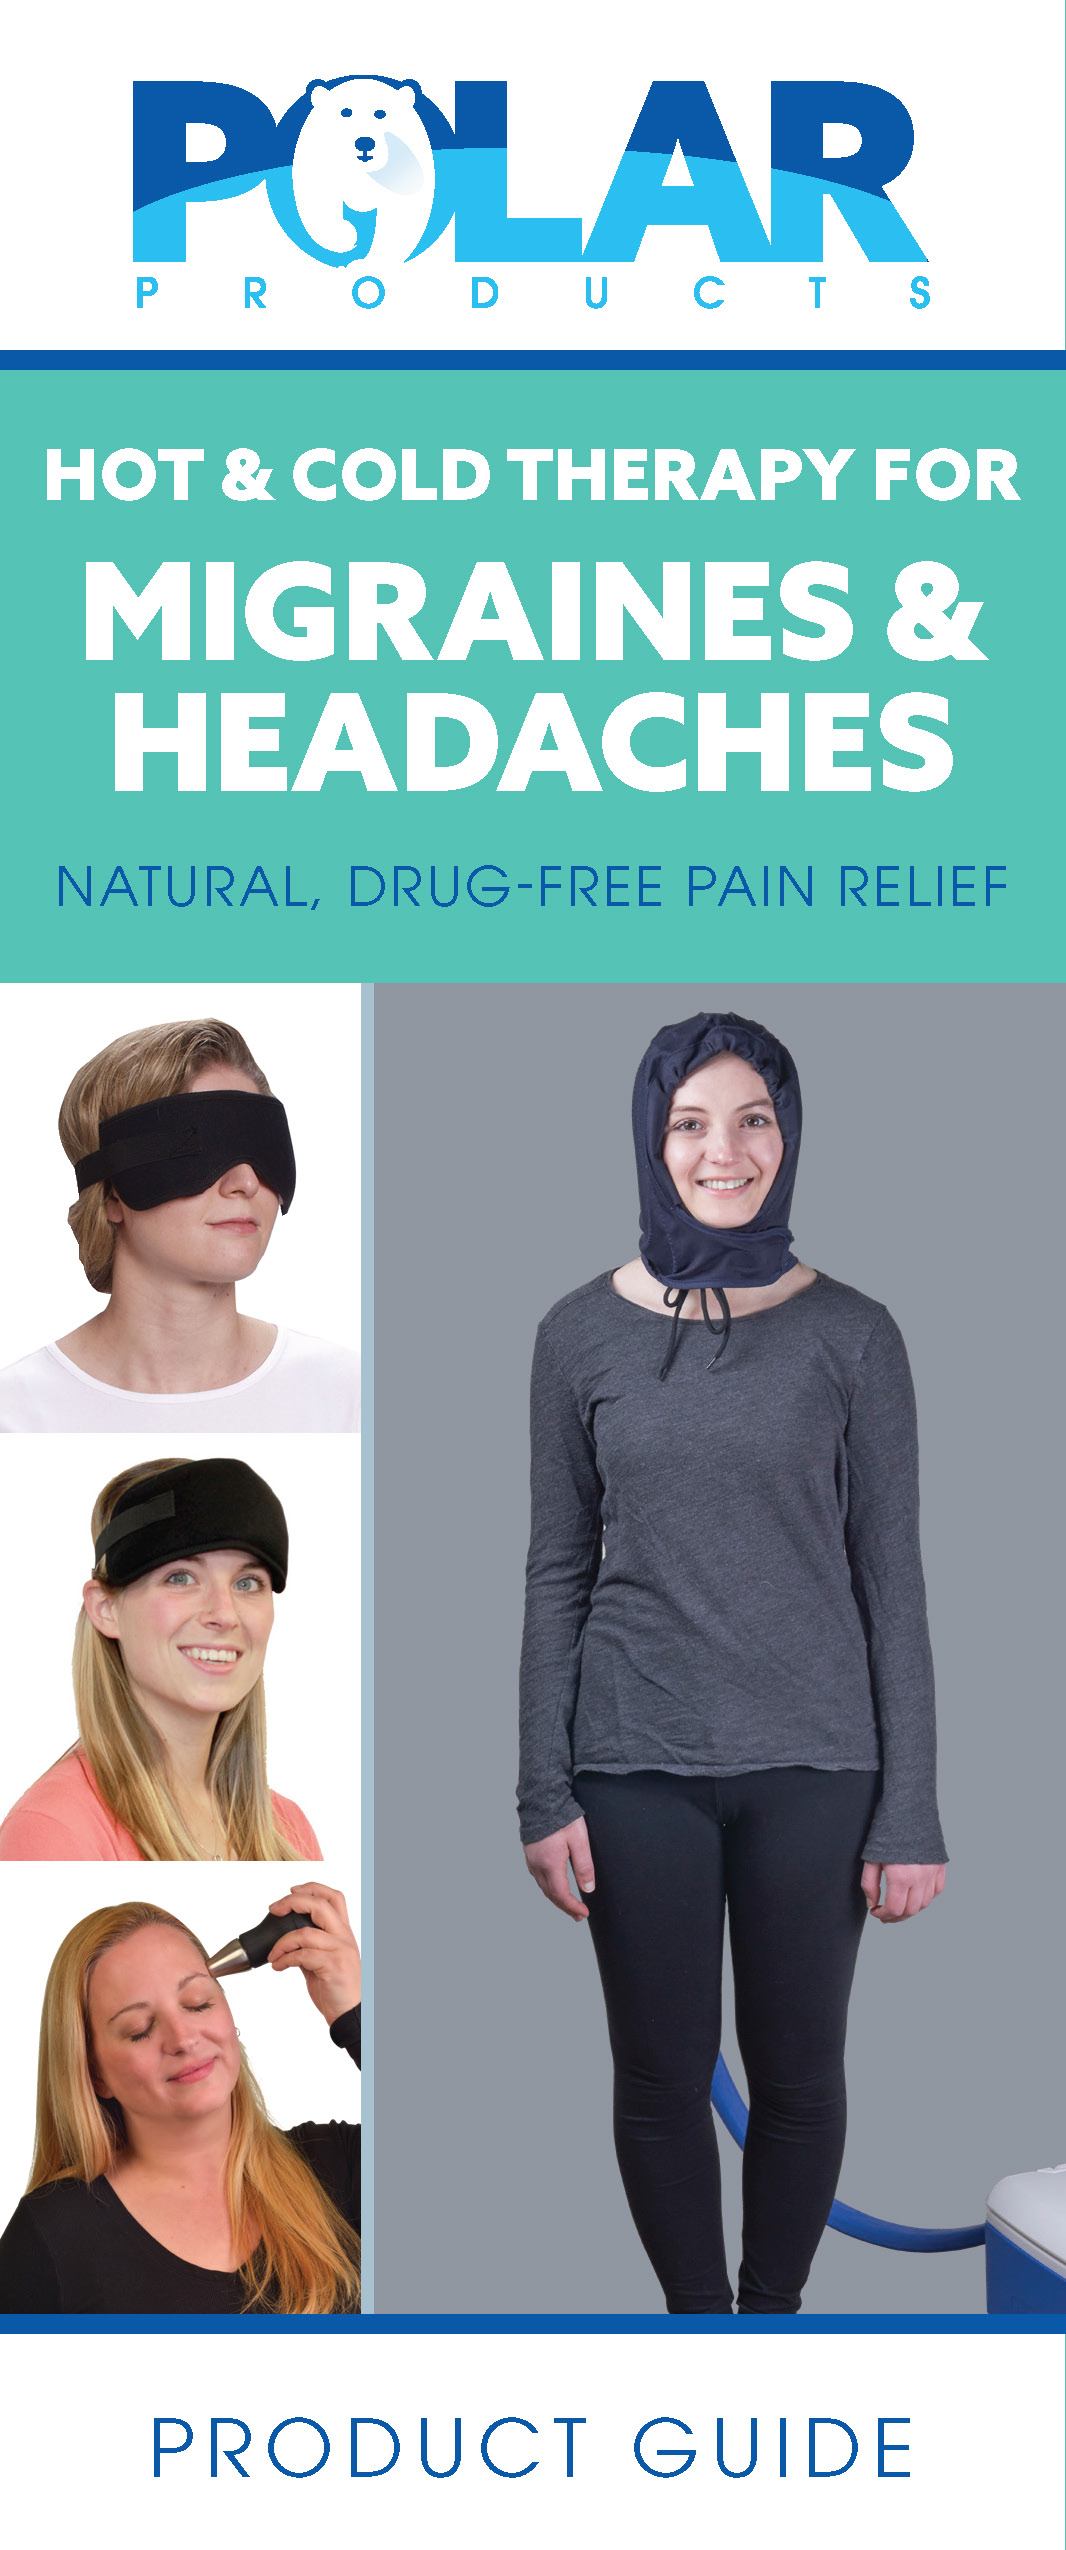 Migraines and Headaches brochure cover